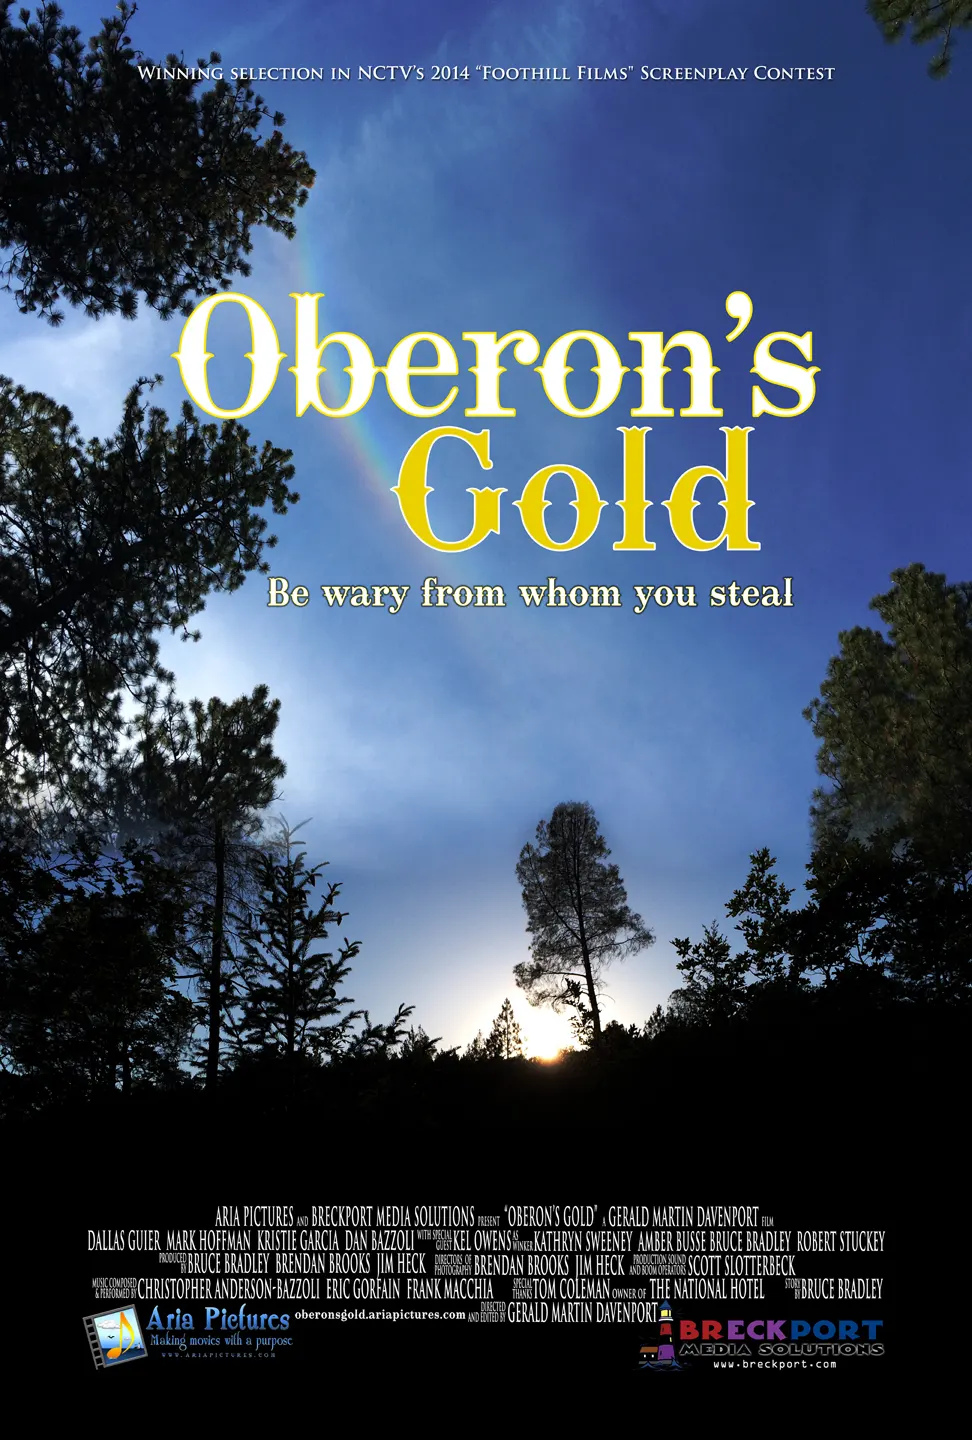 Oberon's Gold movie poster. Blue sky with rainbow and trees with cast and crew credits.